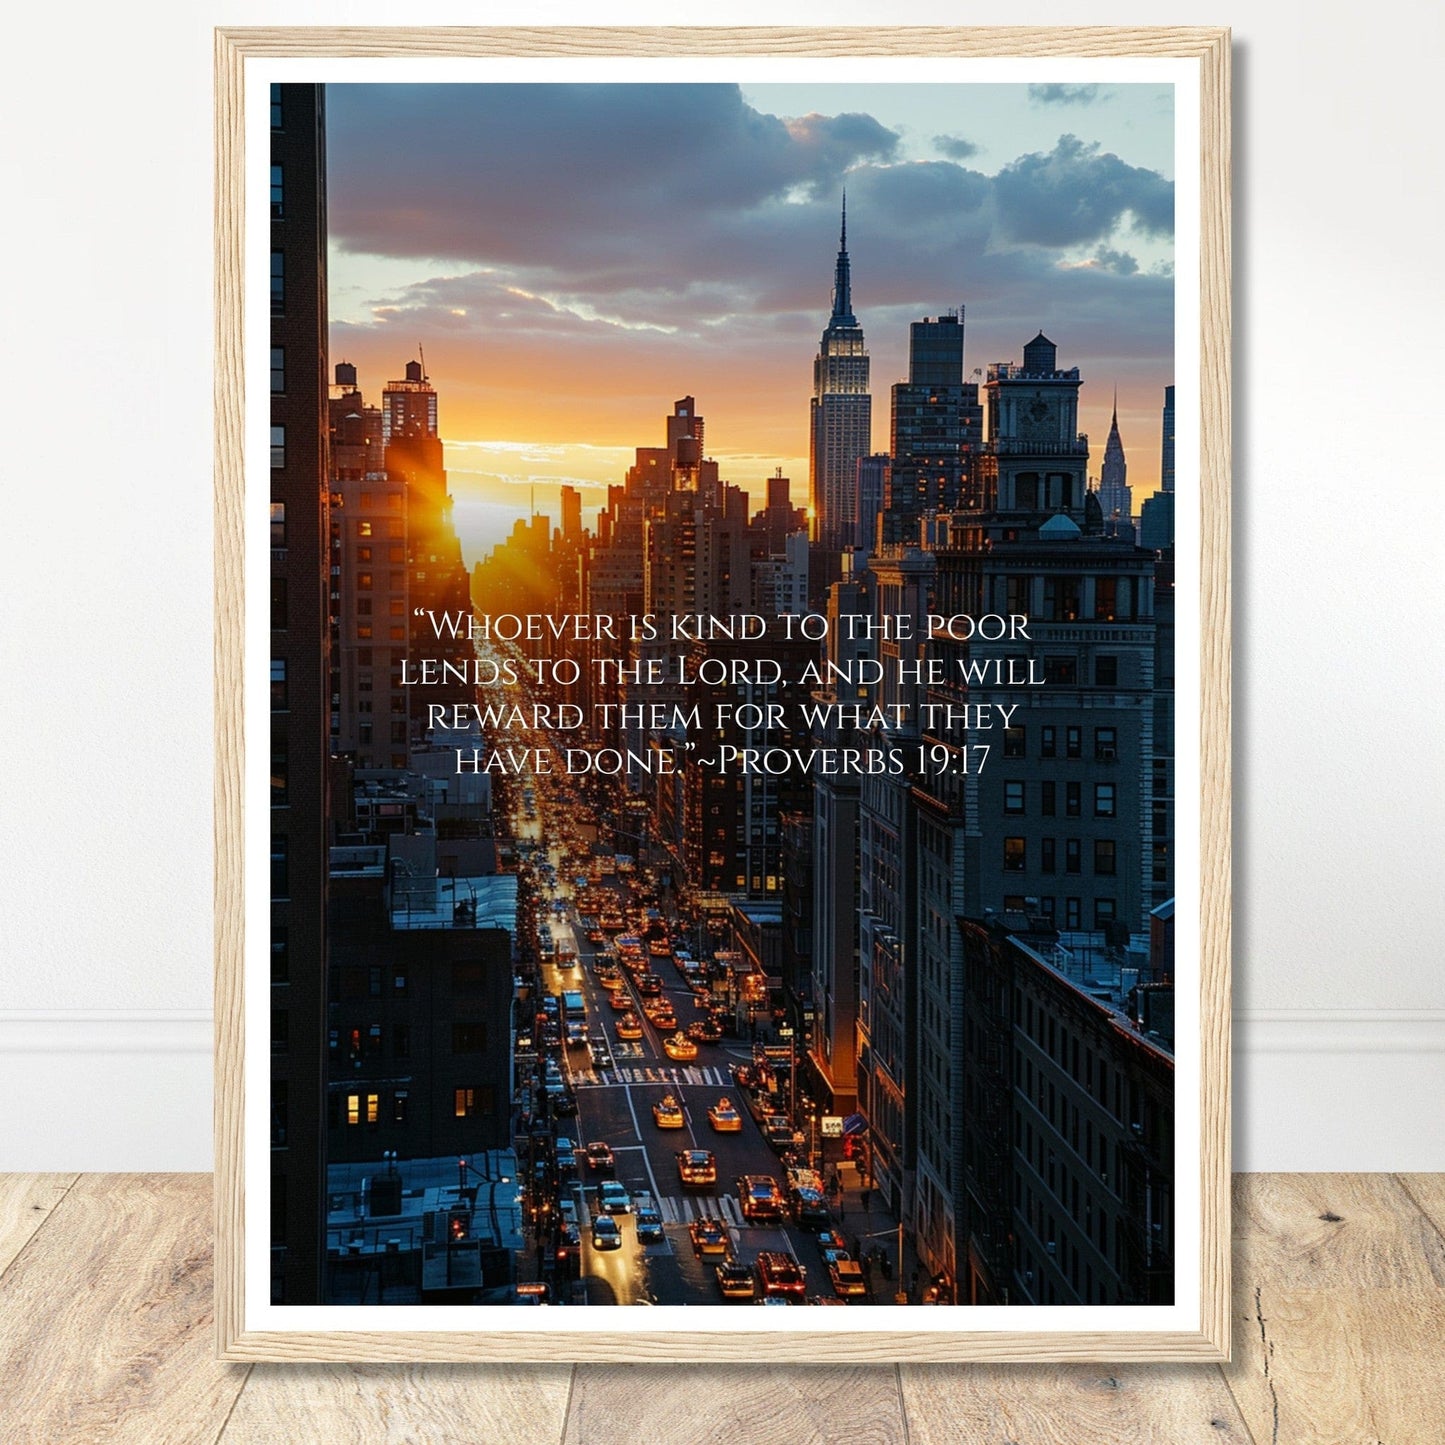 Coffee With My Father Print Material 45x60 cm / 18x24″ / Premium Matte Paper Wooden Framed Poster / Wood frame Framed Template